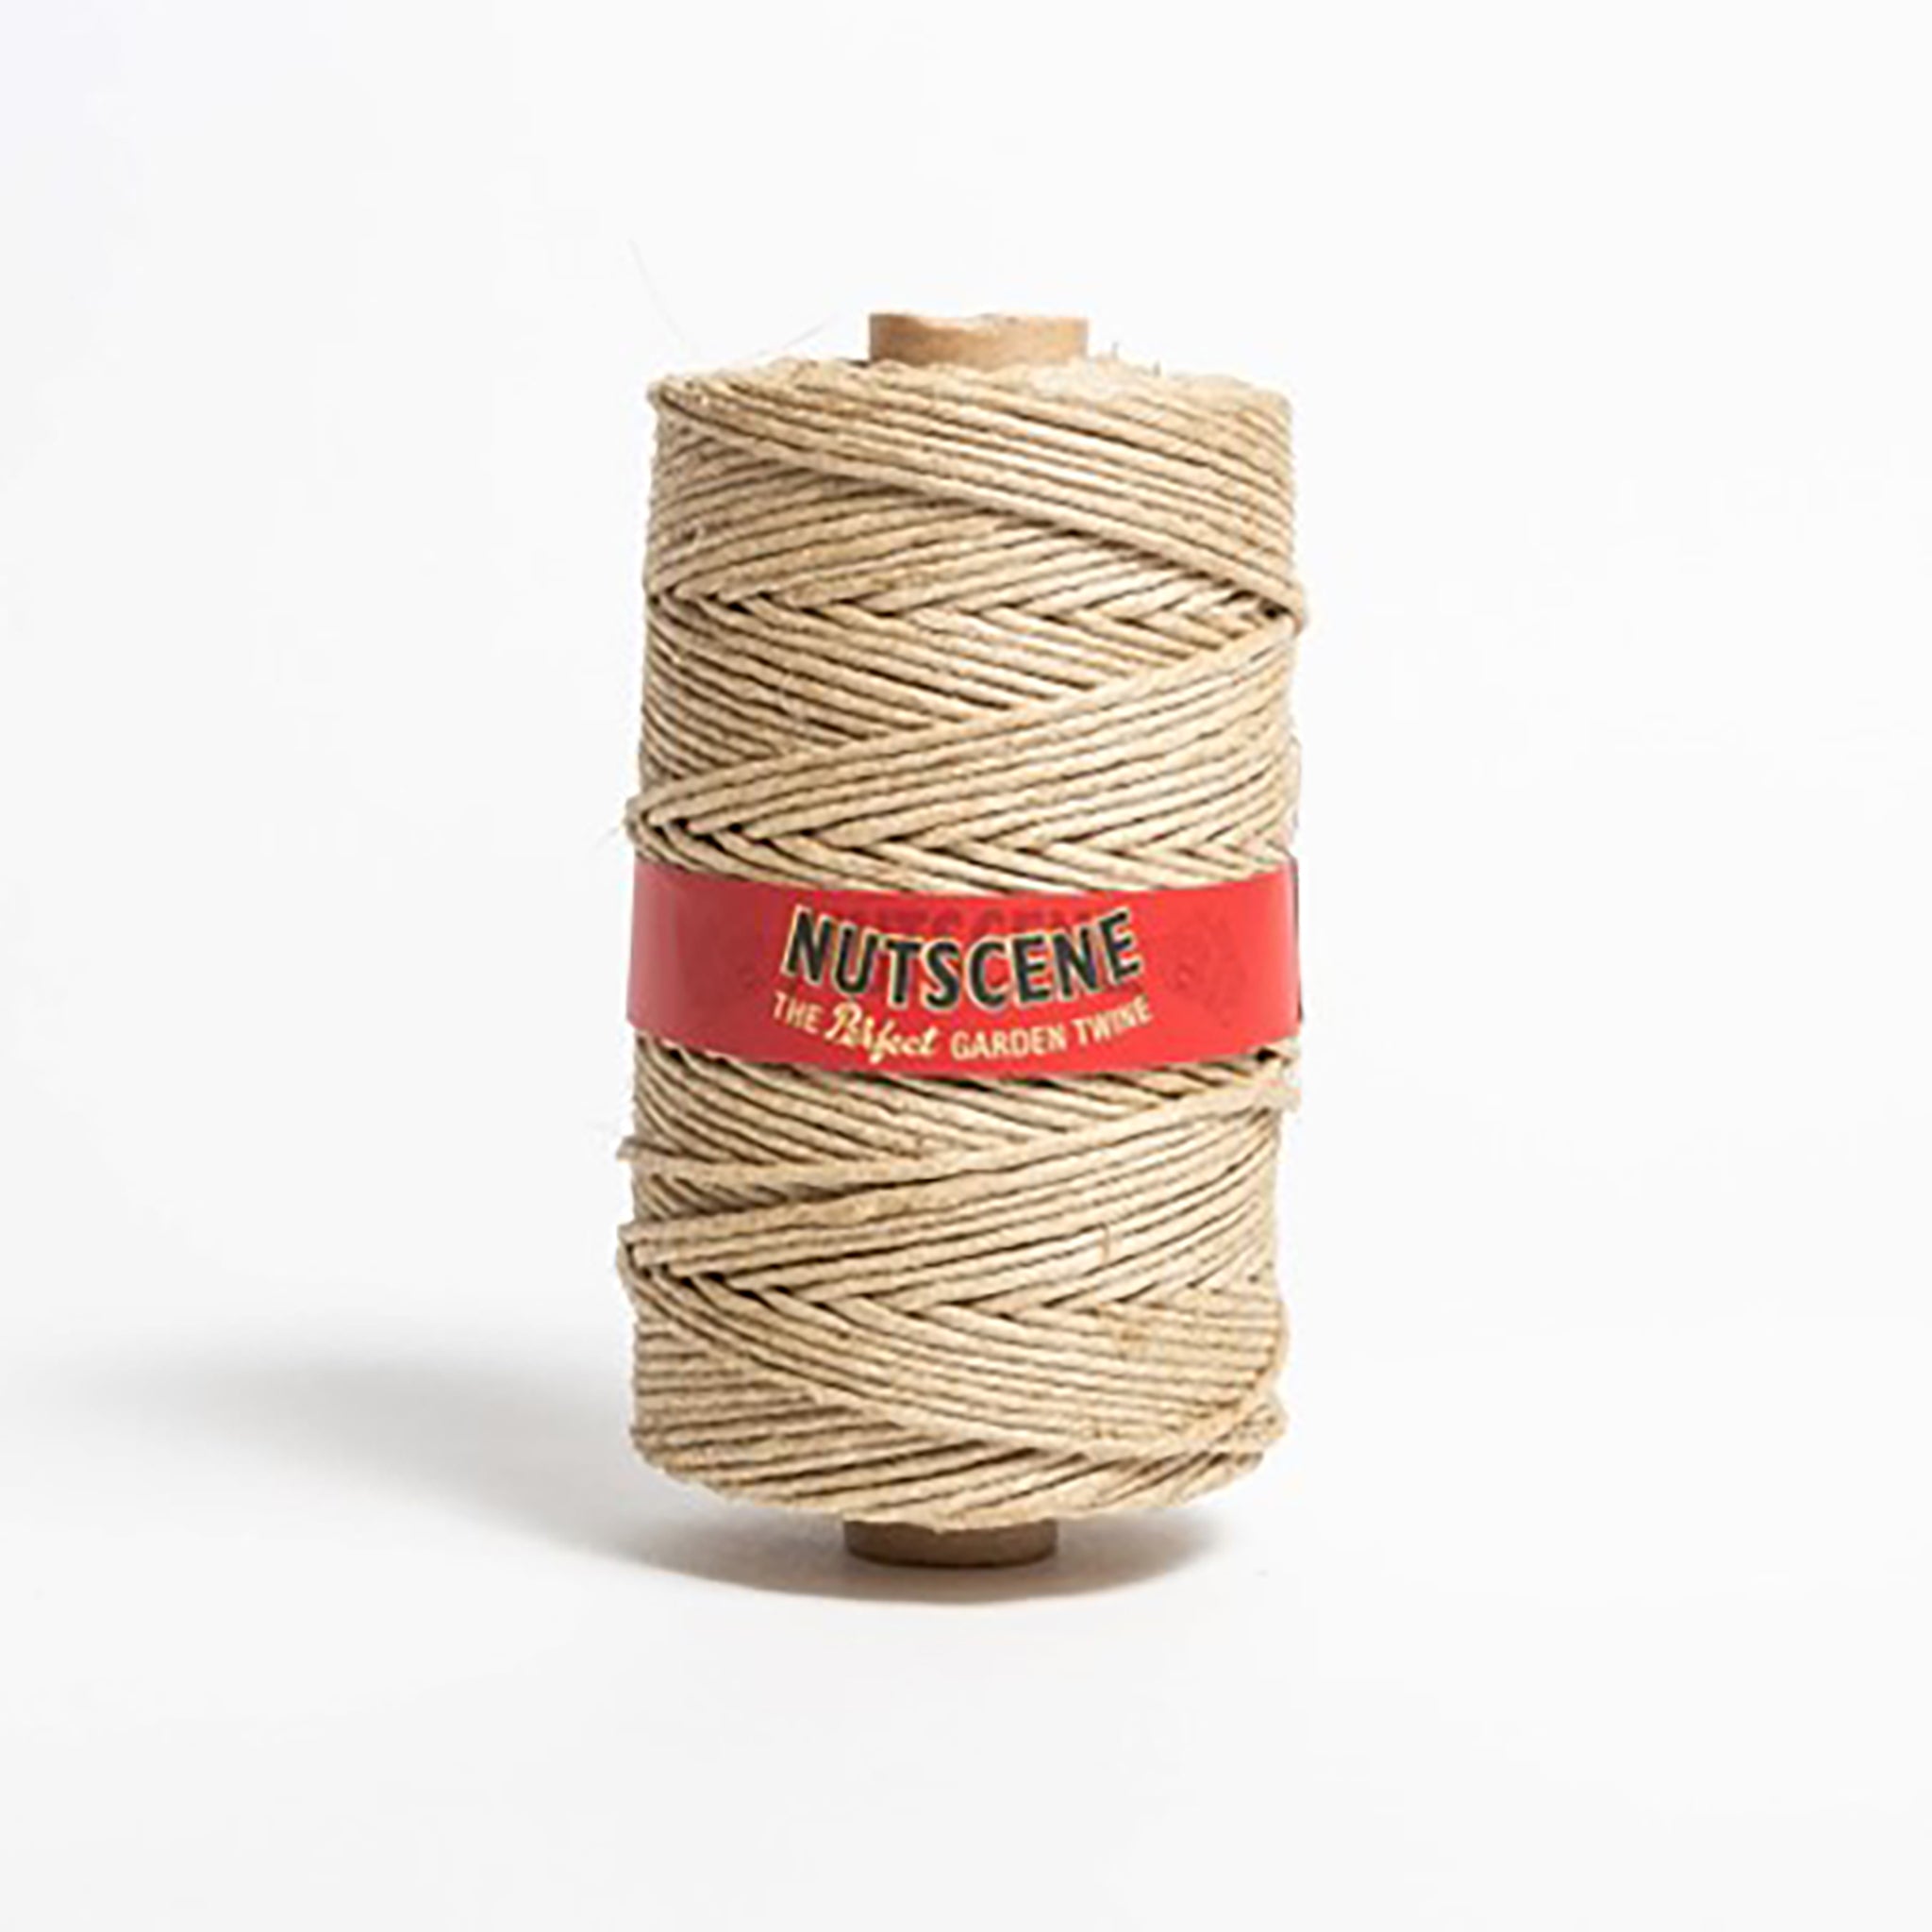 A spool of hairless flax twine, wrapped with a red label